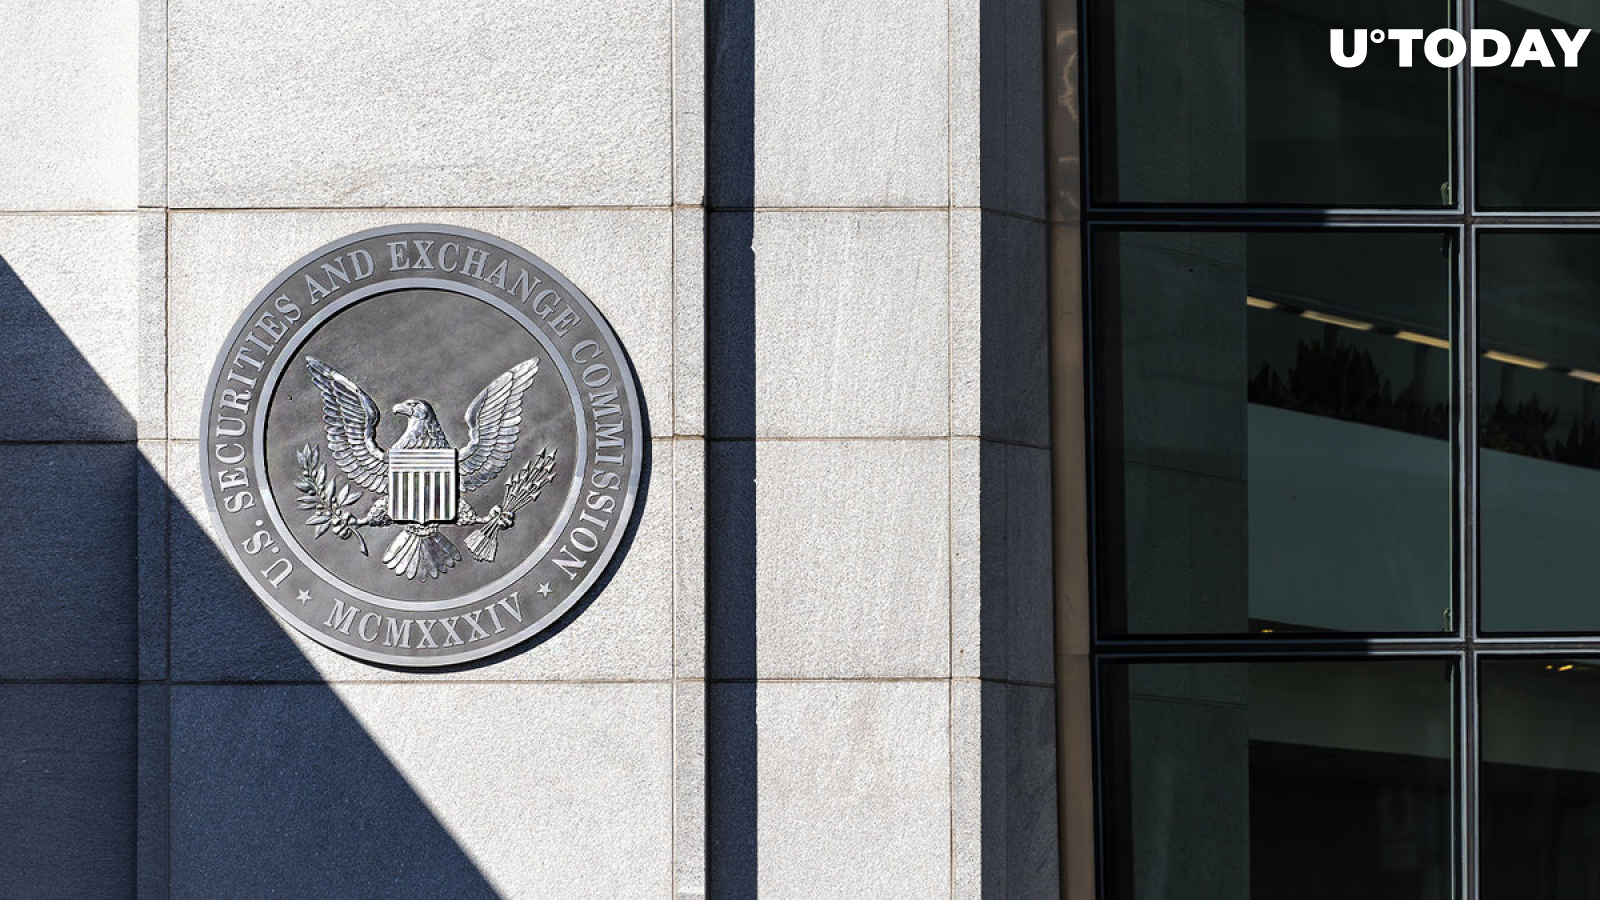 SEC's Hostile Approach to Crypto Space Made Investors Lose Billions of USD: Senate Banking Committee